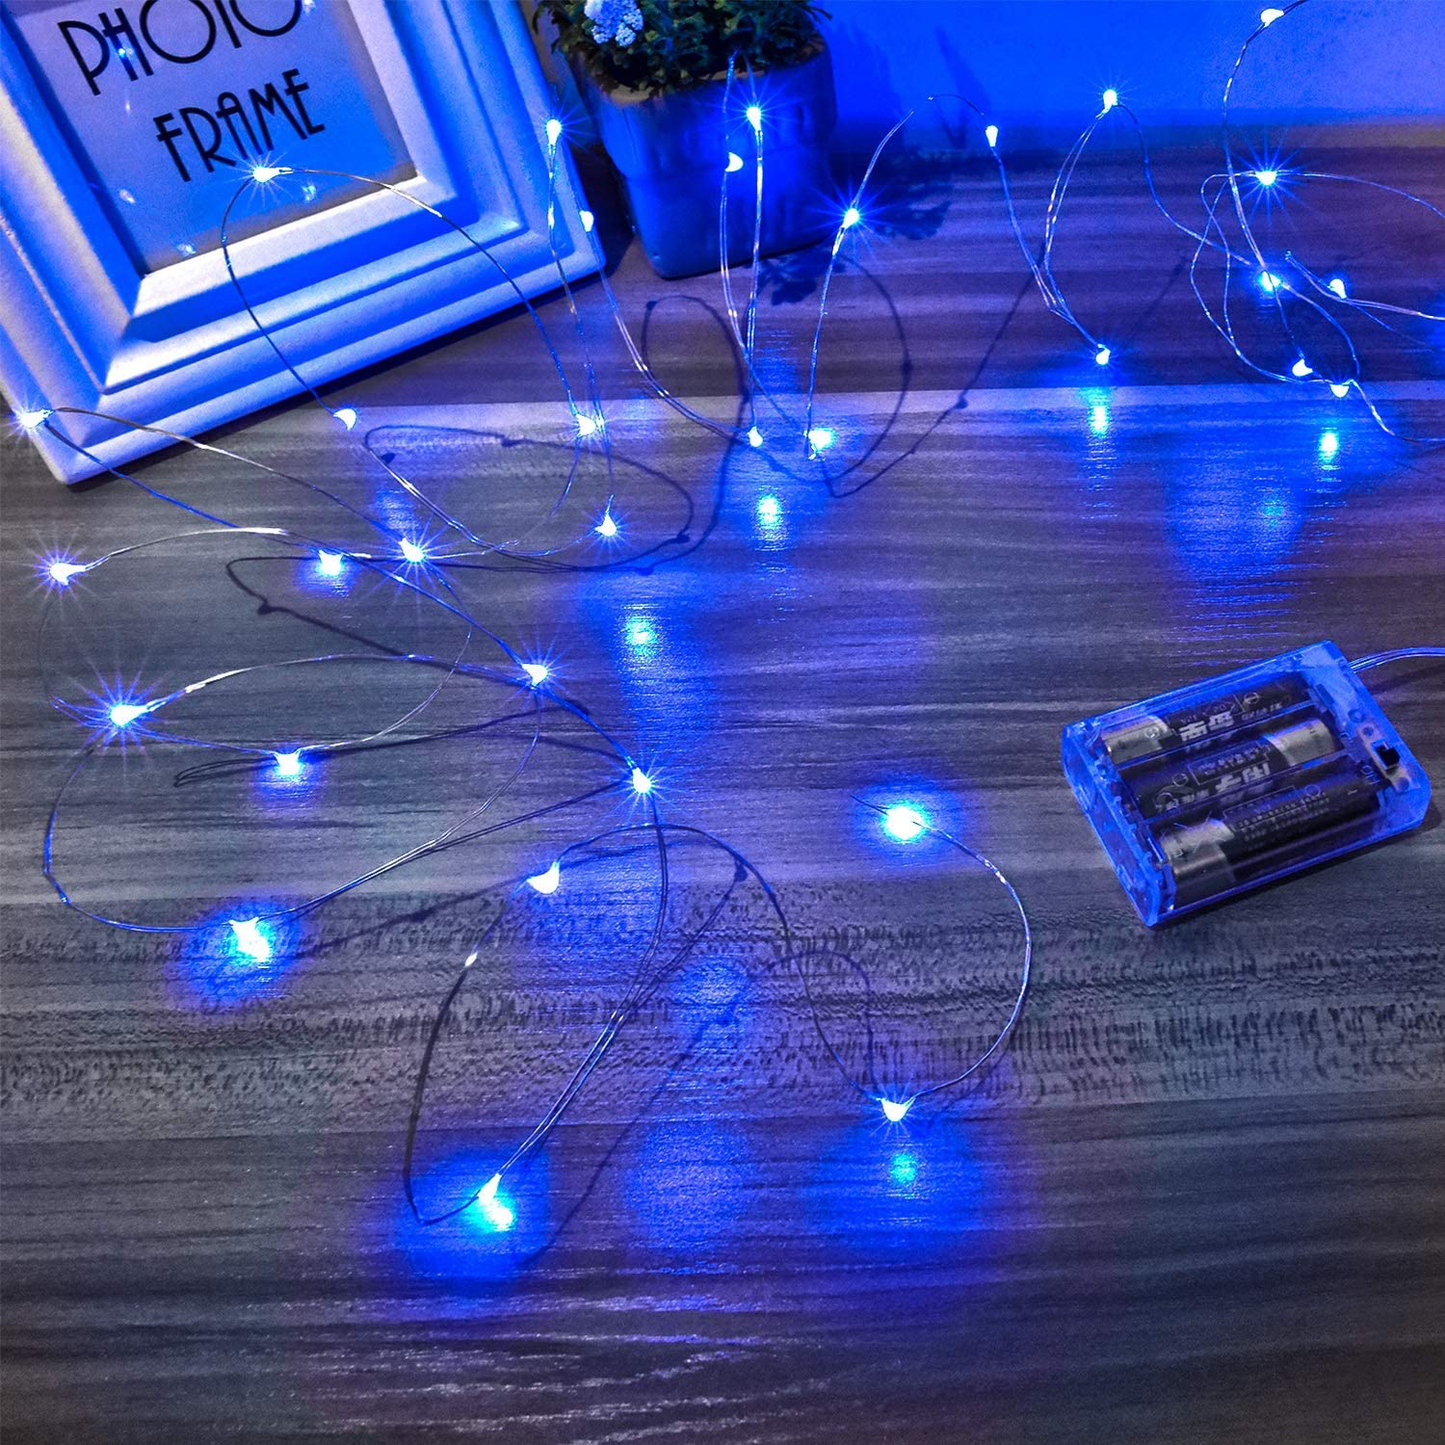 Ariceleo Led Fairy Lights Battery Operated, 4 Packs Mini Battery Powered Copper Wire Starry Fairy Lights for Bedroom, Christmas, Parties, Wedding, Centerpiece, Decoration (5m/16ft Blue)